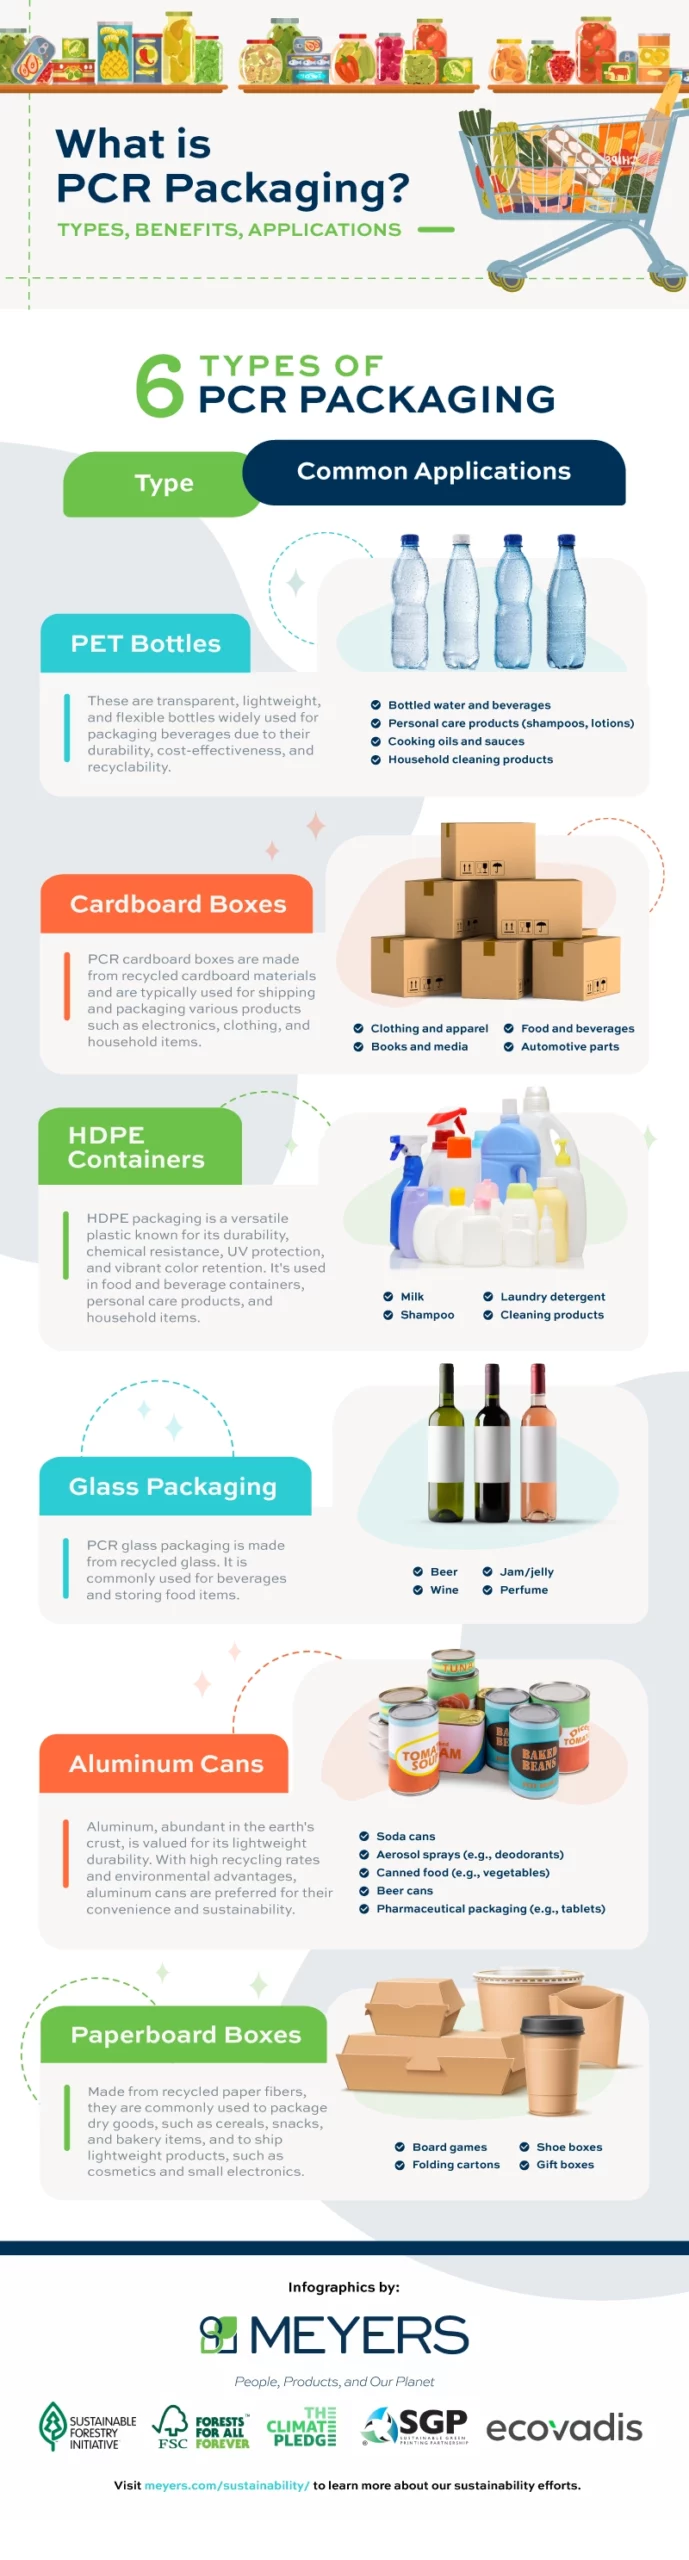 Types of PCR Packaging, infographic